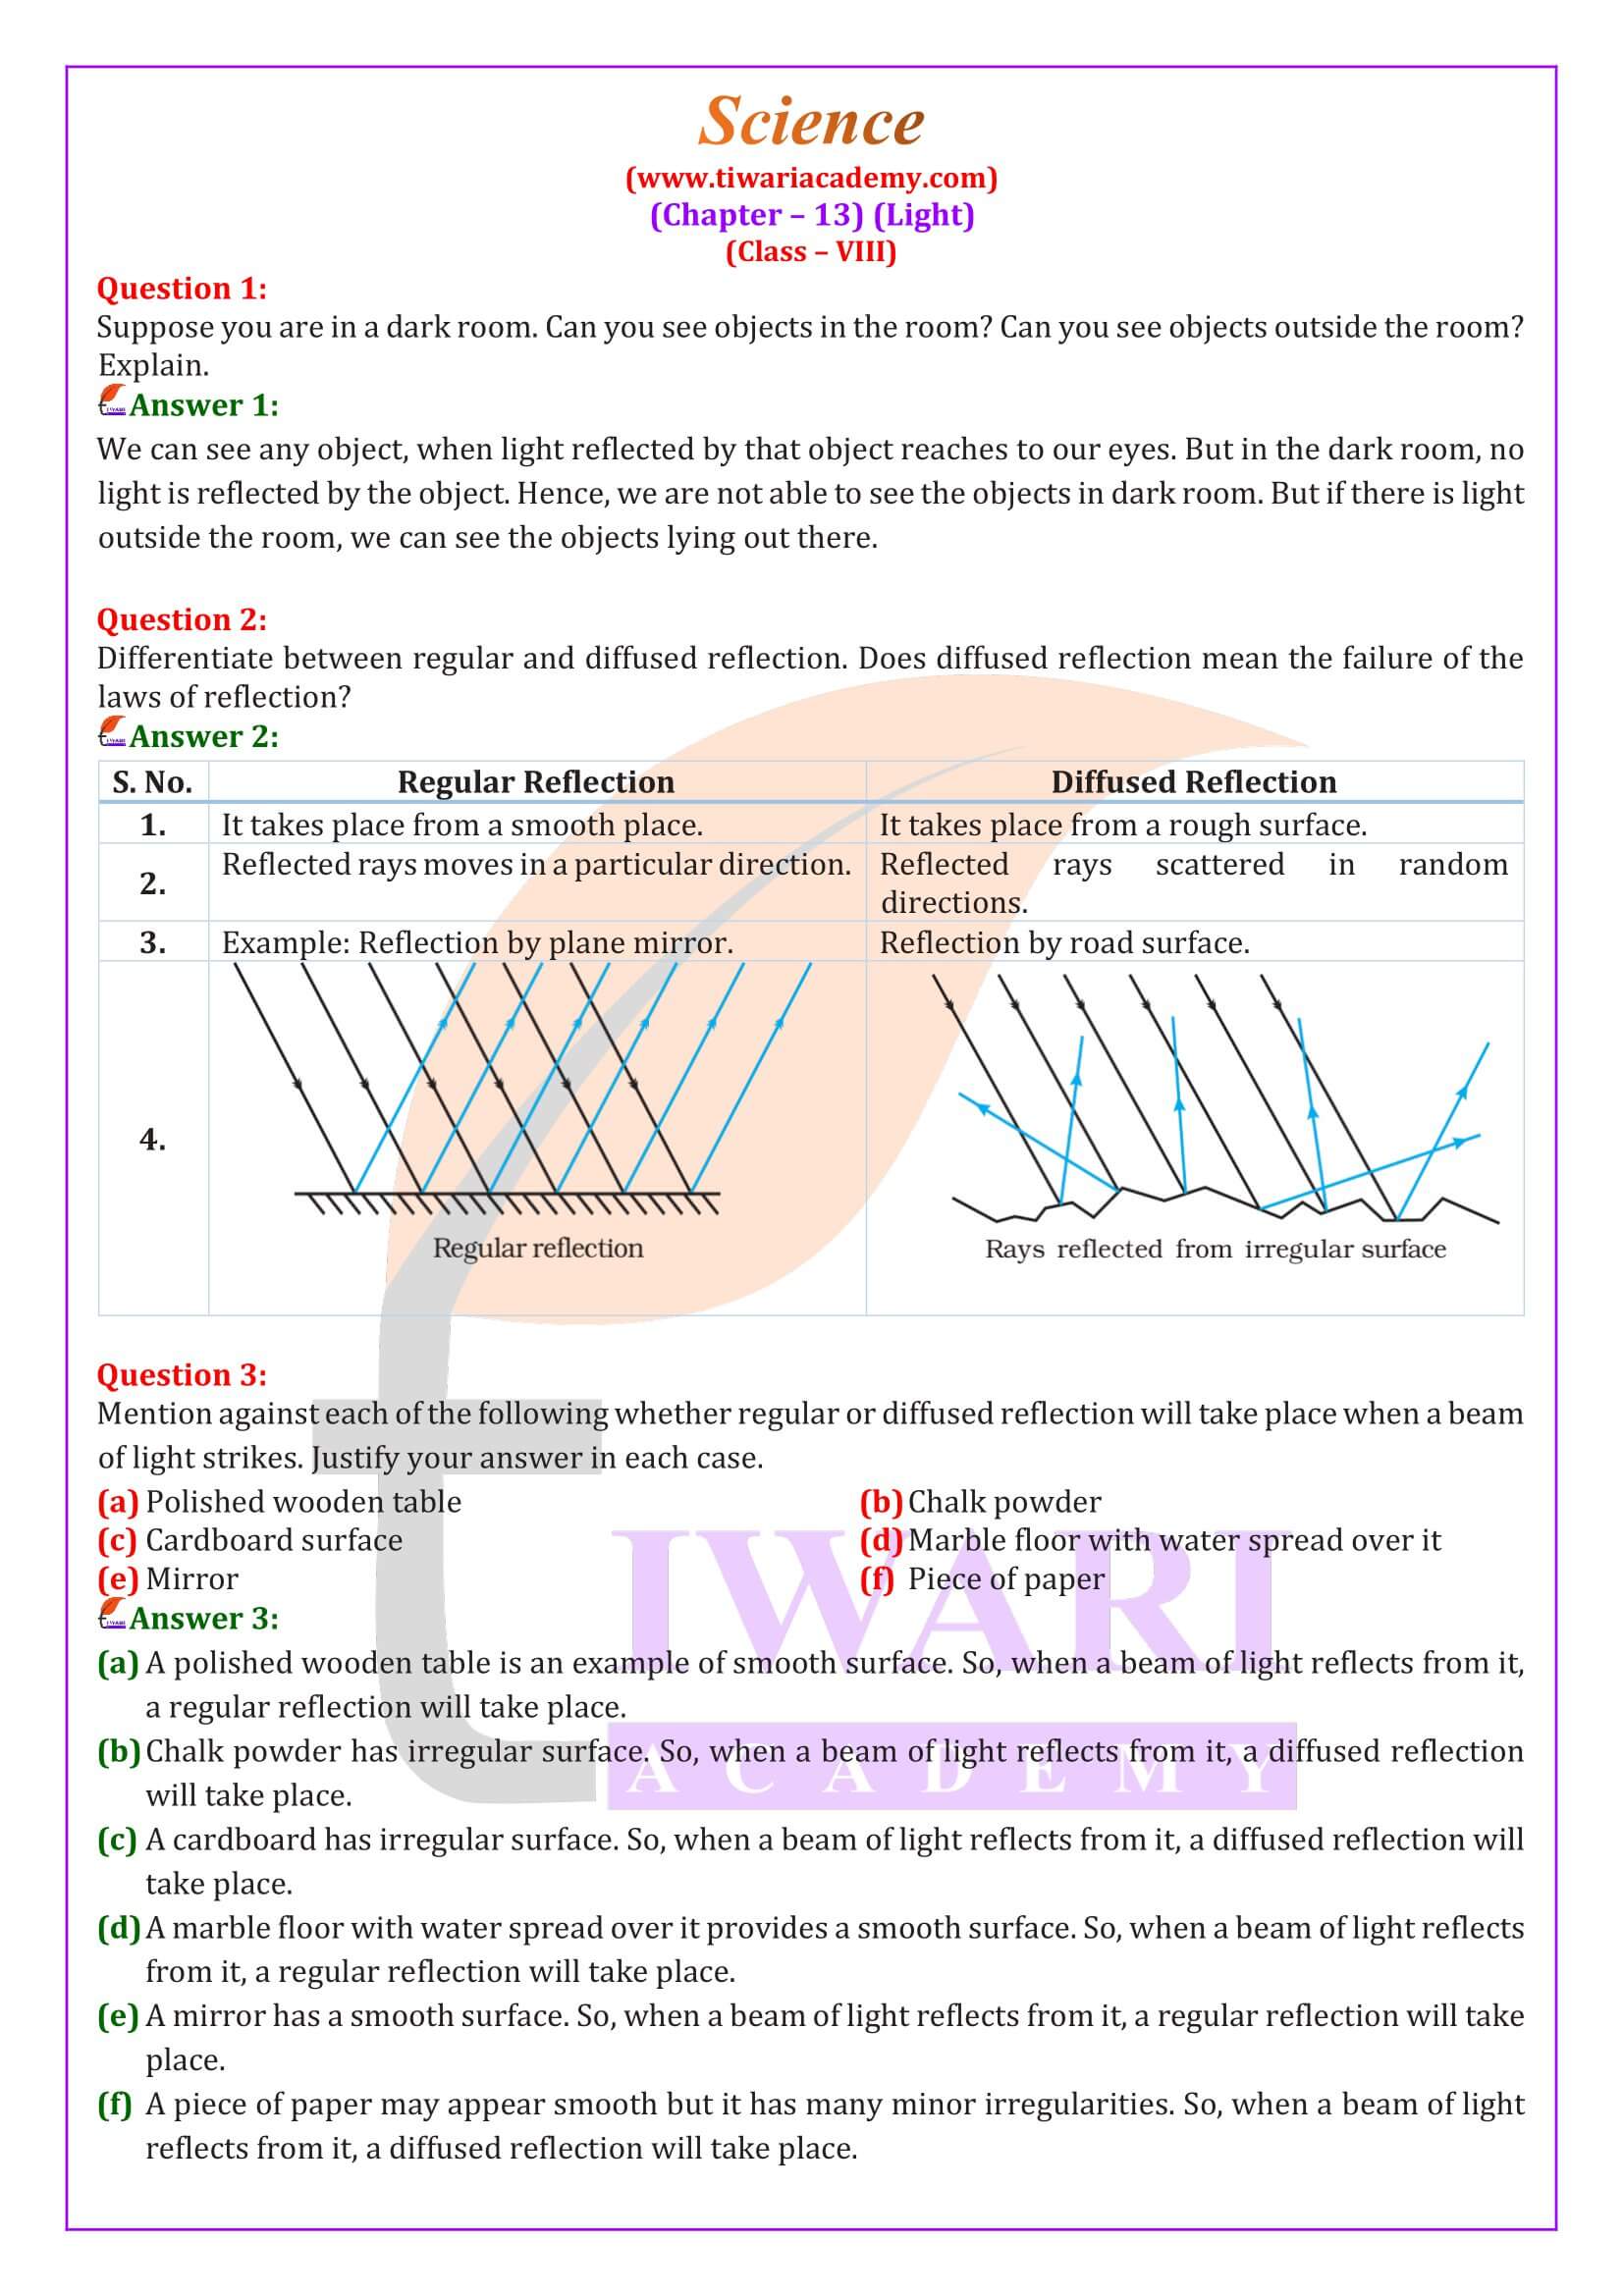 NCERT Solutions for Class 8 Science Chapter 13